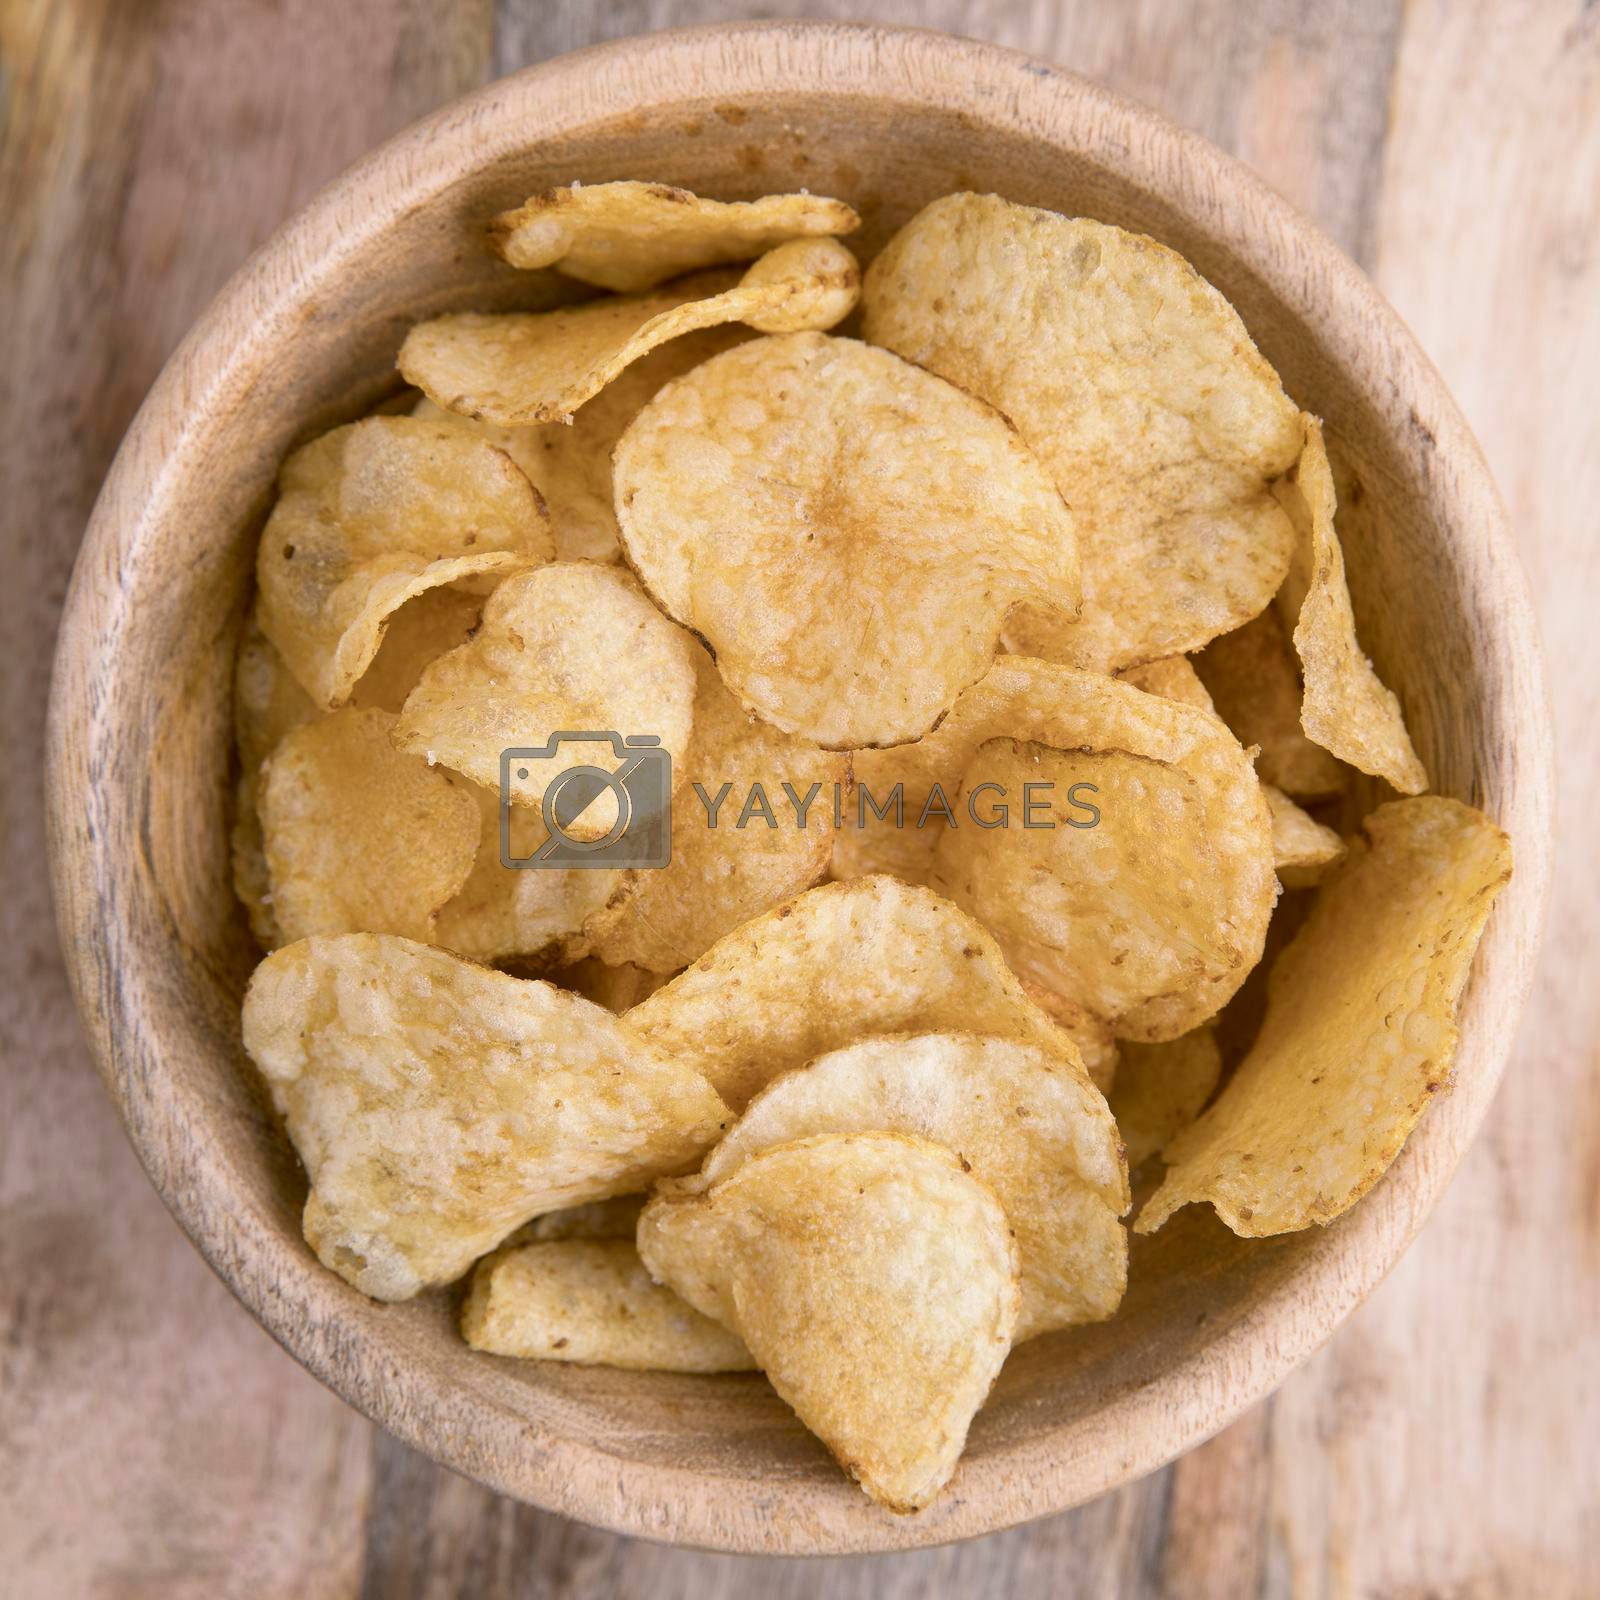 Royalty free image of Bowl of Chips by charlotteLake